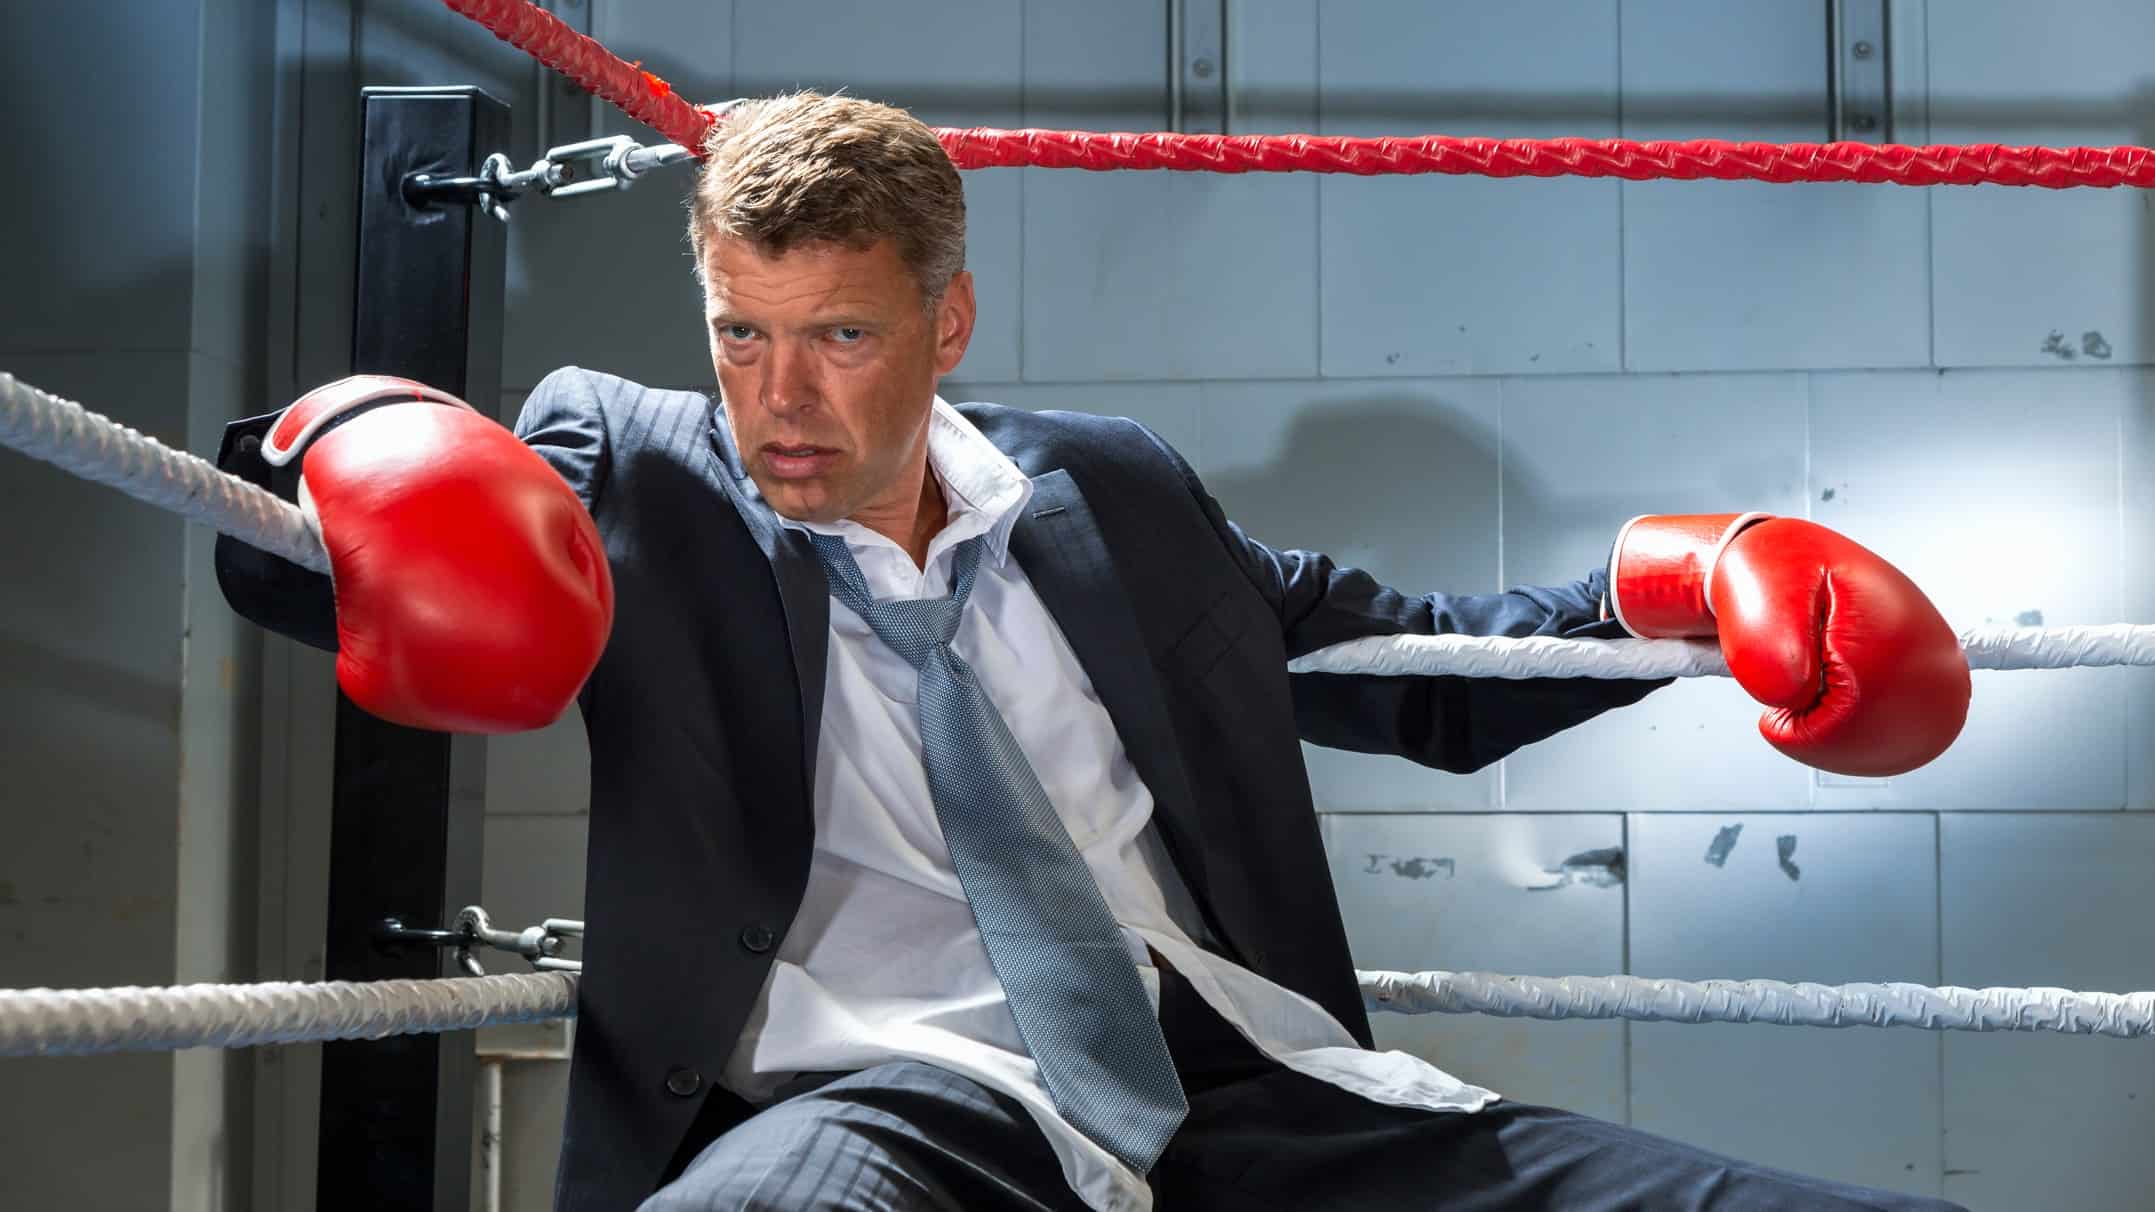 A corporate executive in a suit and wearing boxing gloves slumps in the corner of the ring representing the battered Zip share price and consideration reportedly being given to dumping the company's UK operations